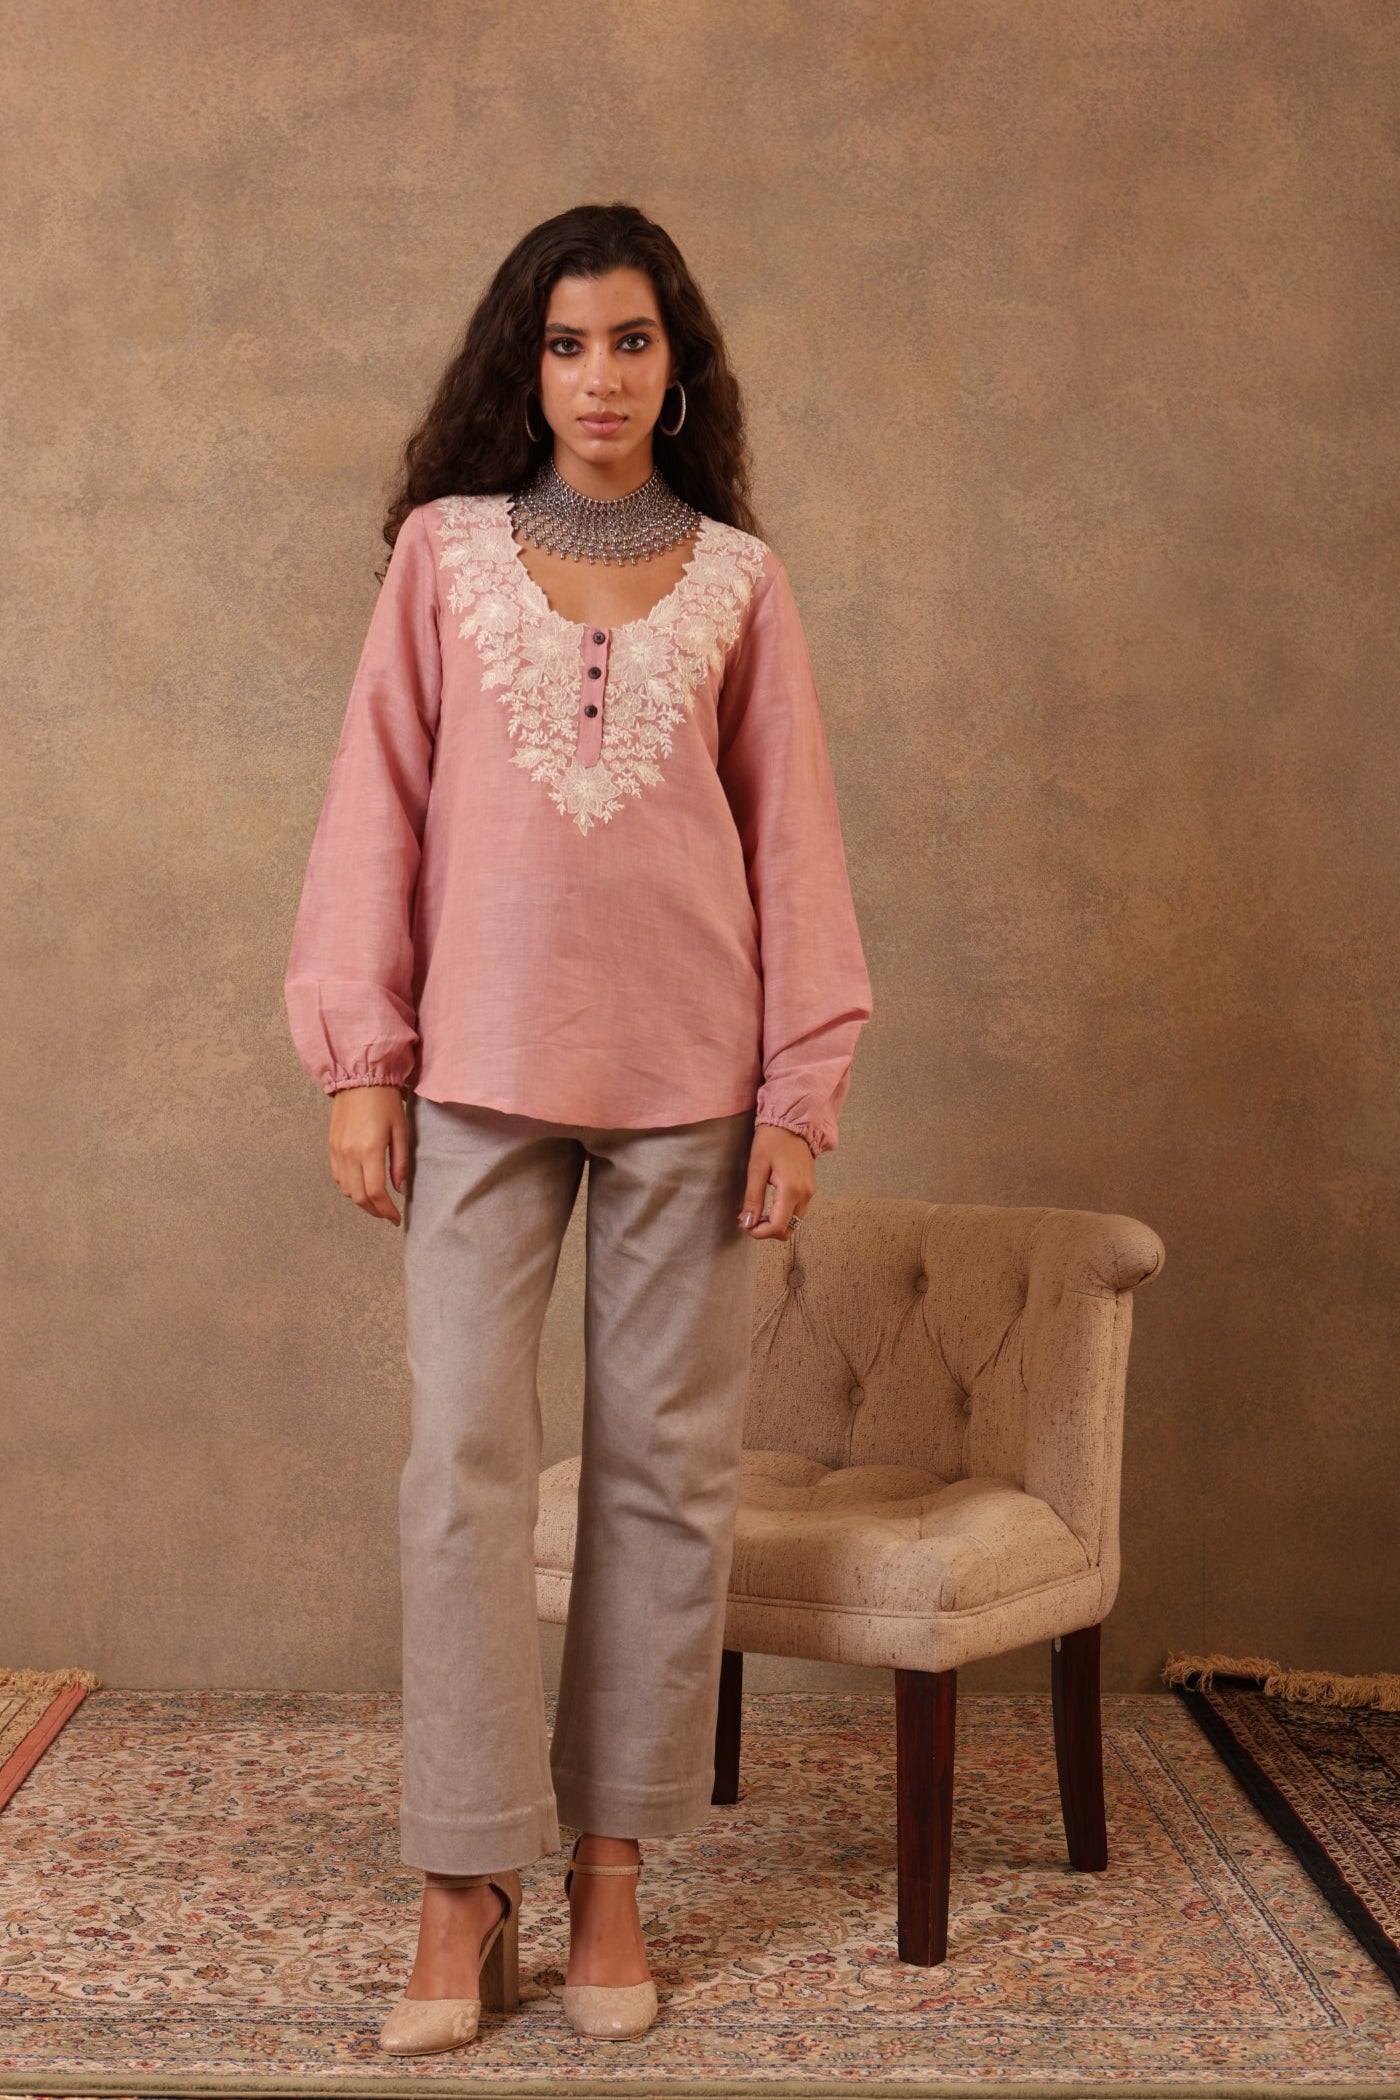 Dusty-Pink Hand-Embroidered (Cutwork) Pure Linen-Cotton Short Blouse With Scalloped Neckline